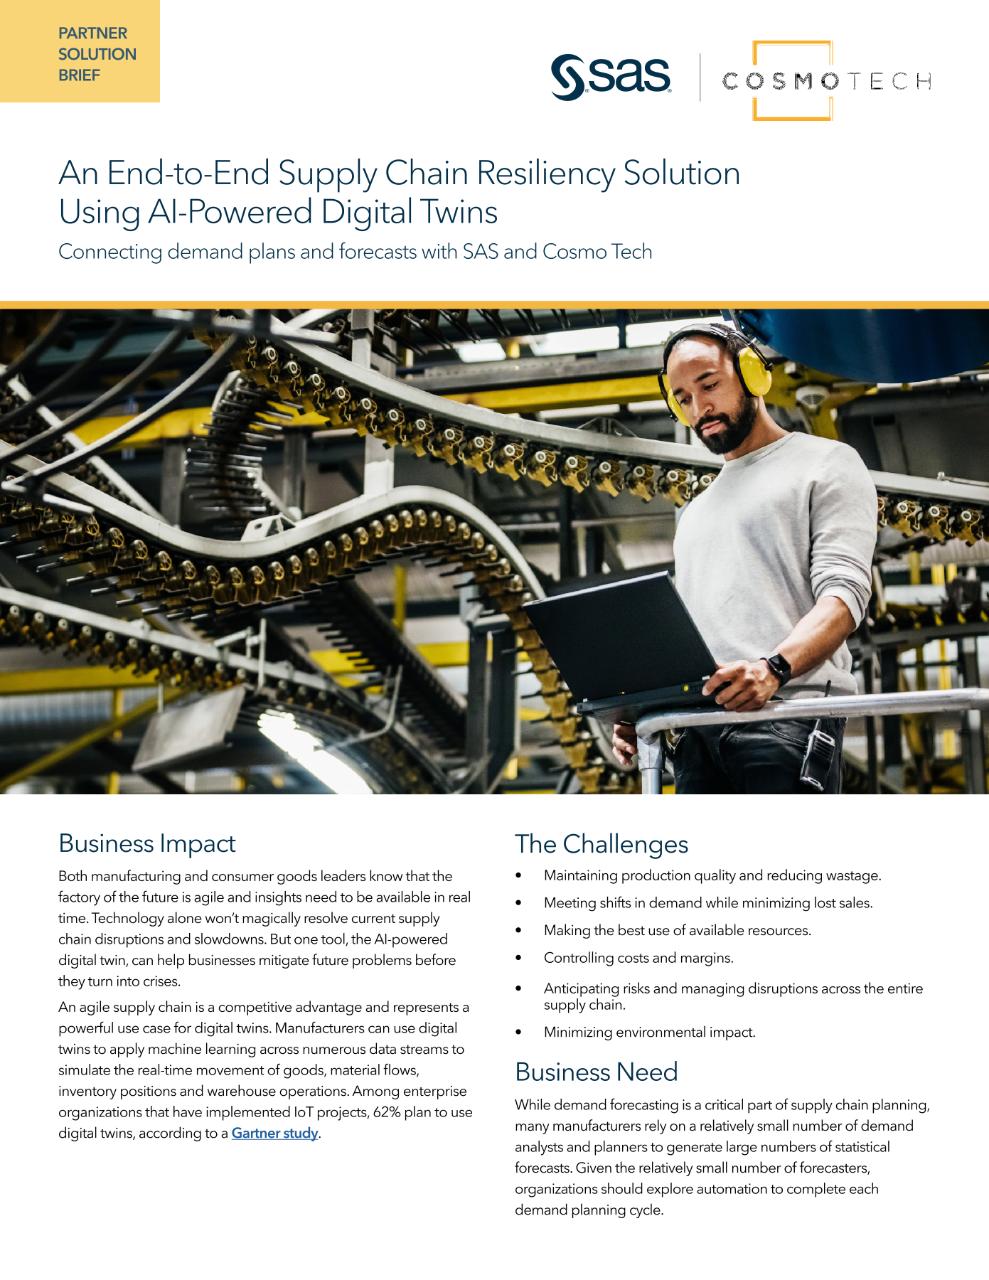 Read the SAS and Cosmo Tech solution brief